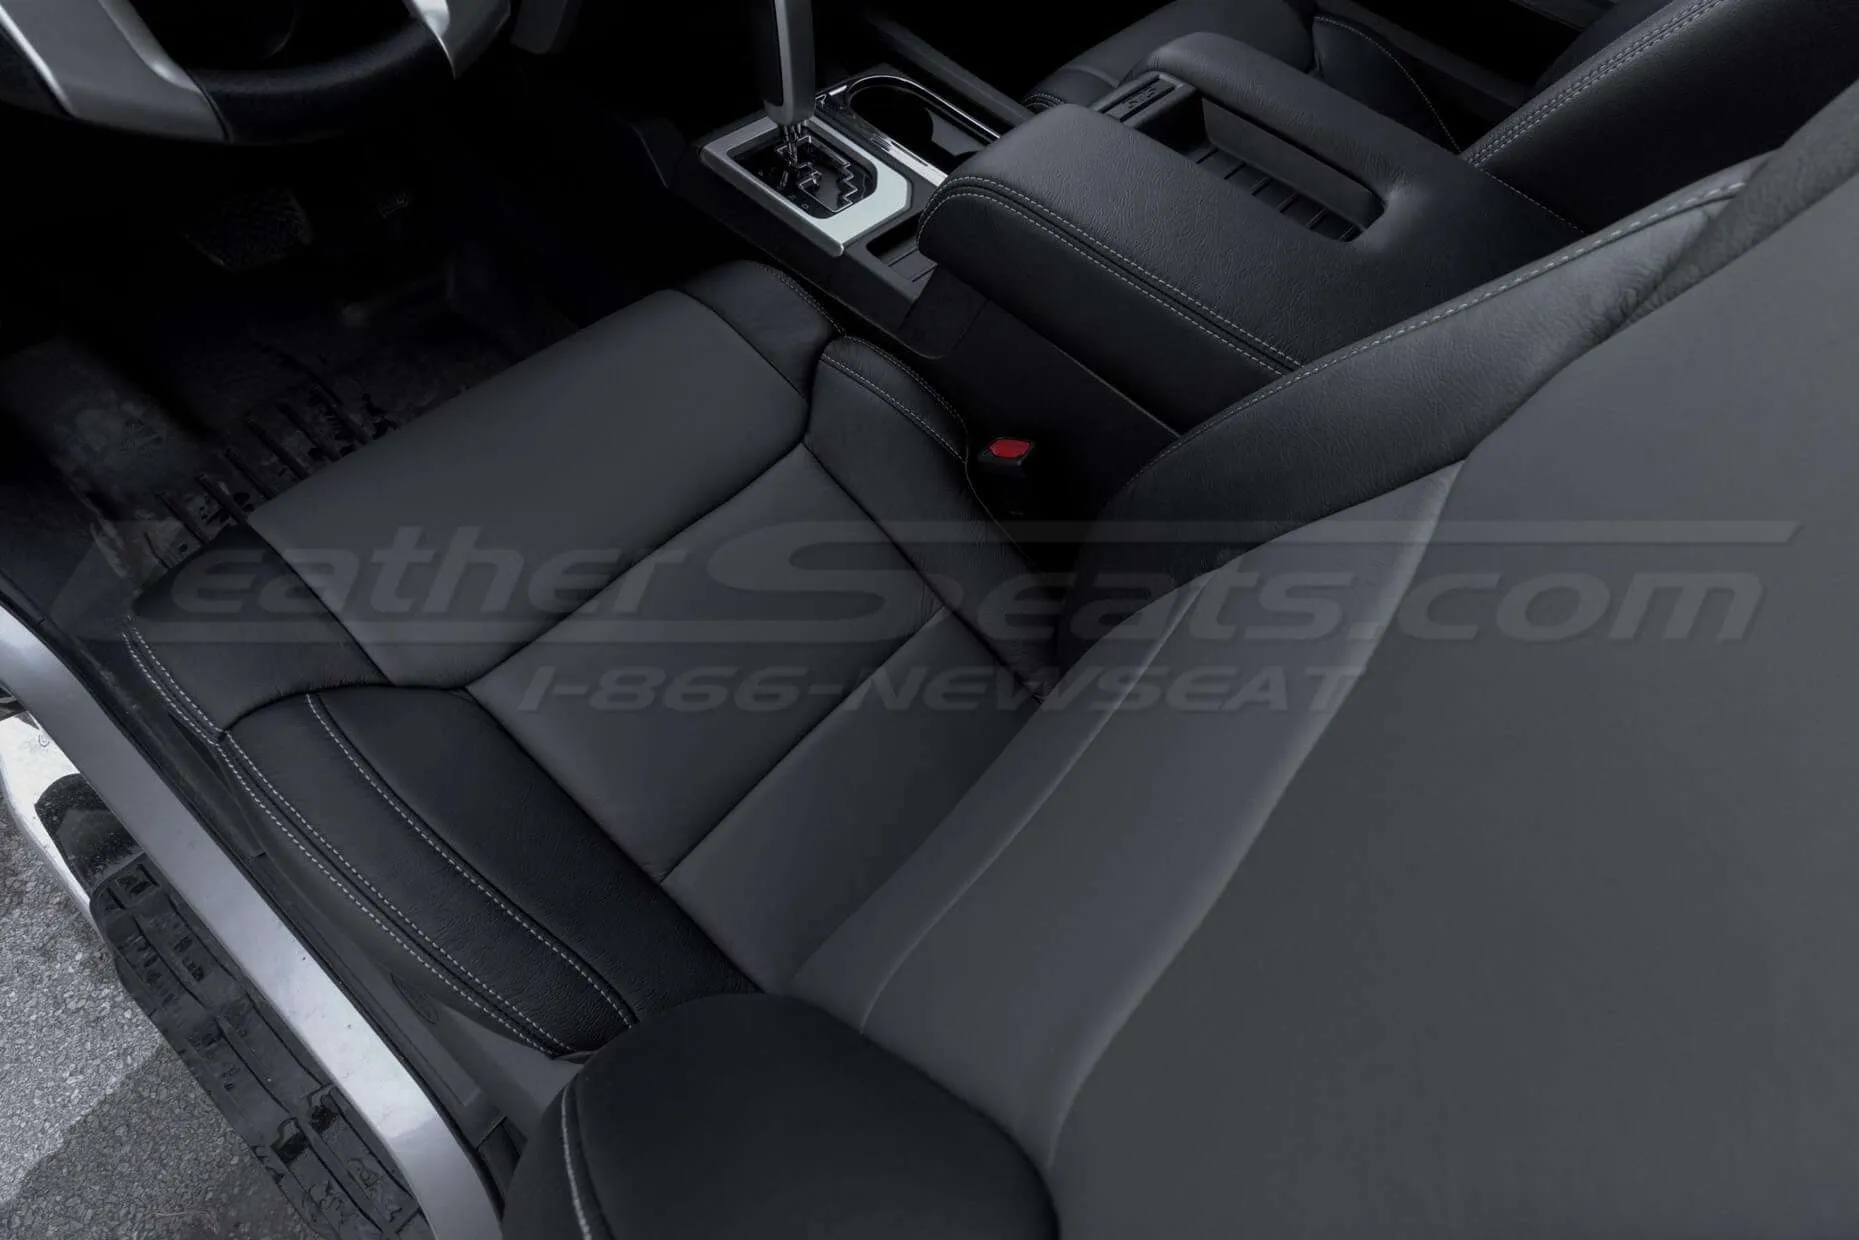 Top down view of two-tone leather seats in black & charcoal